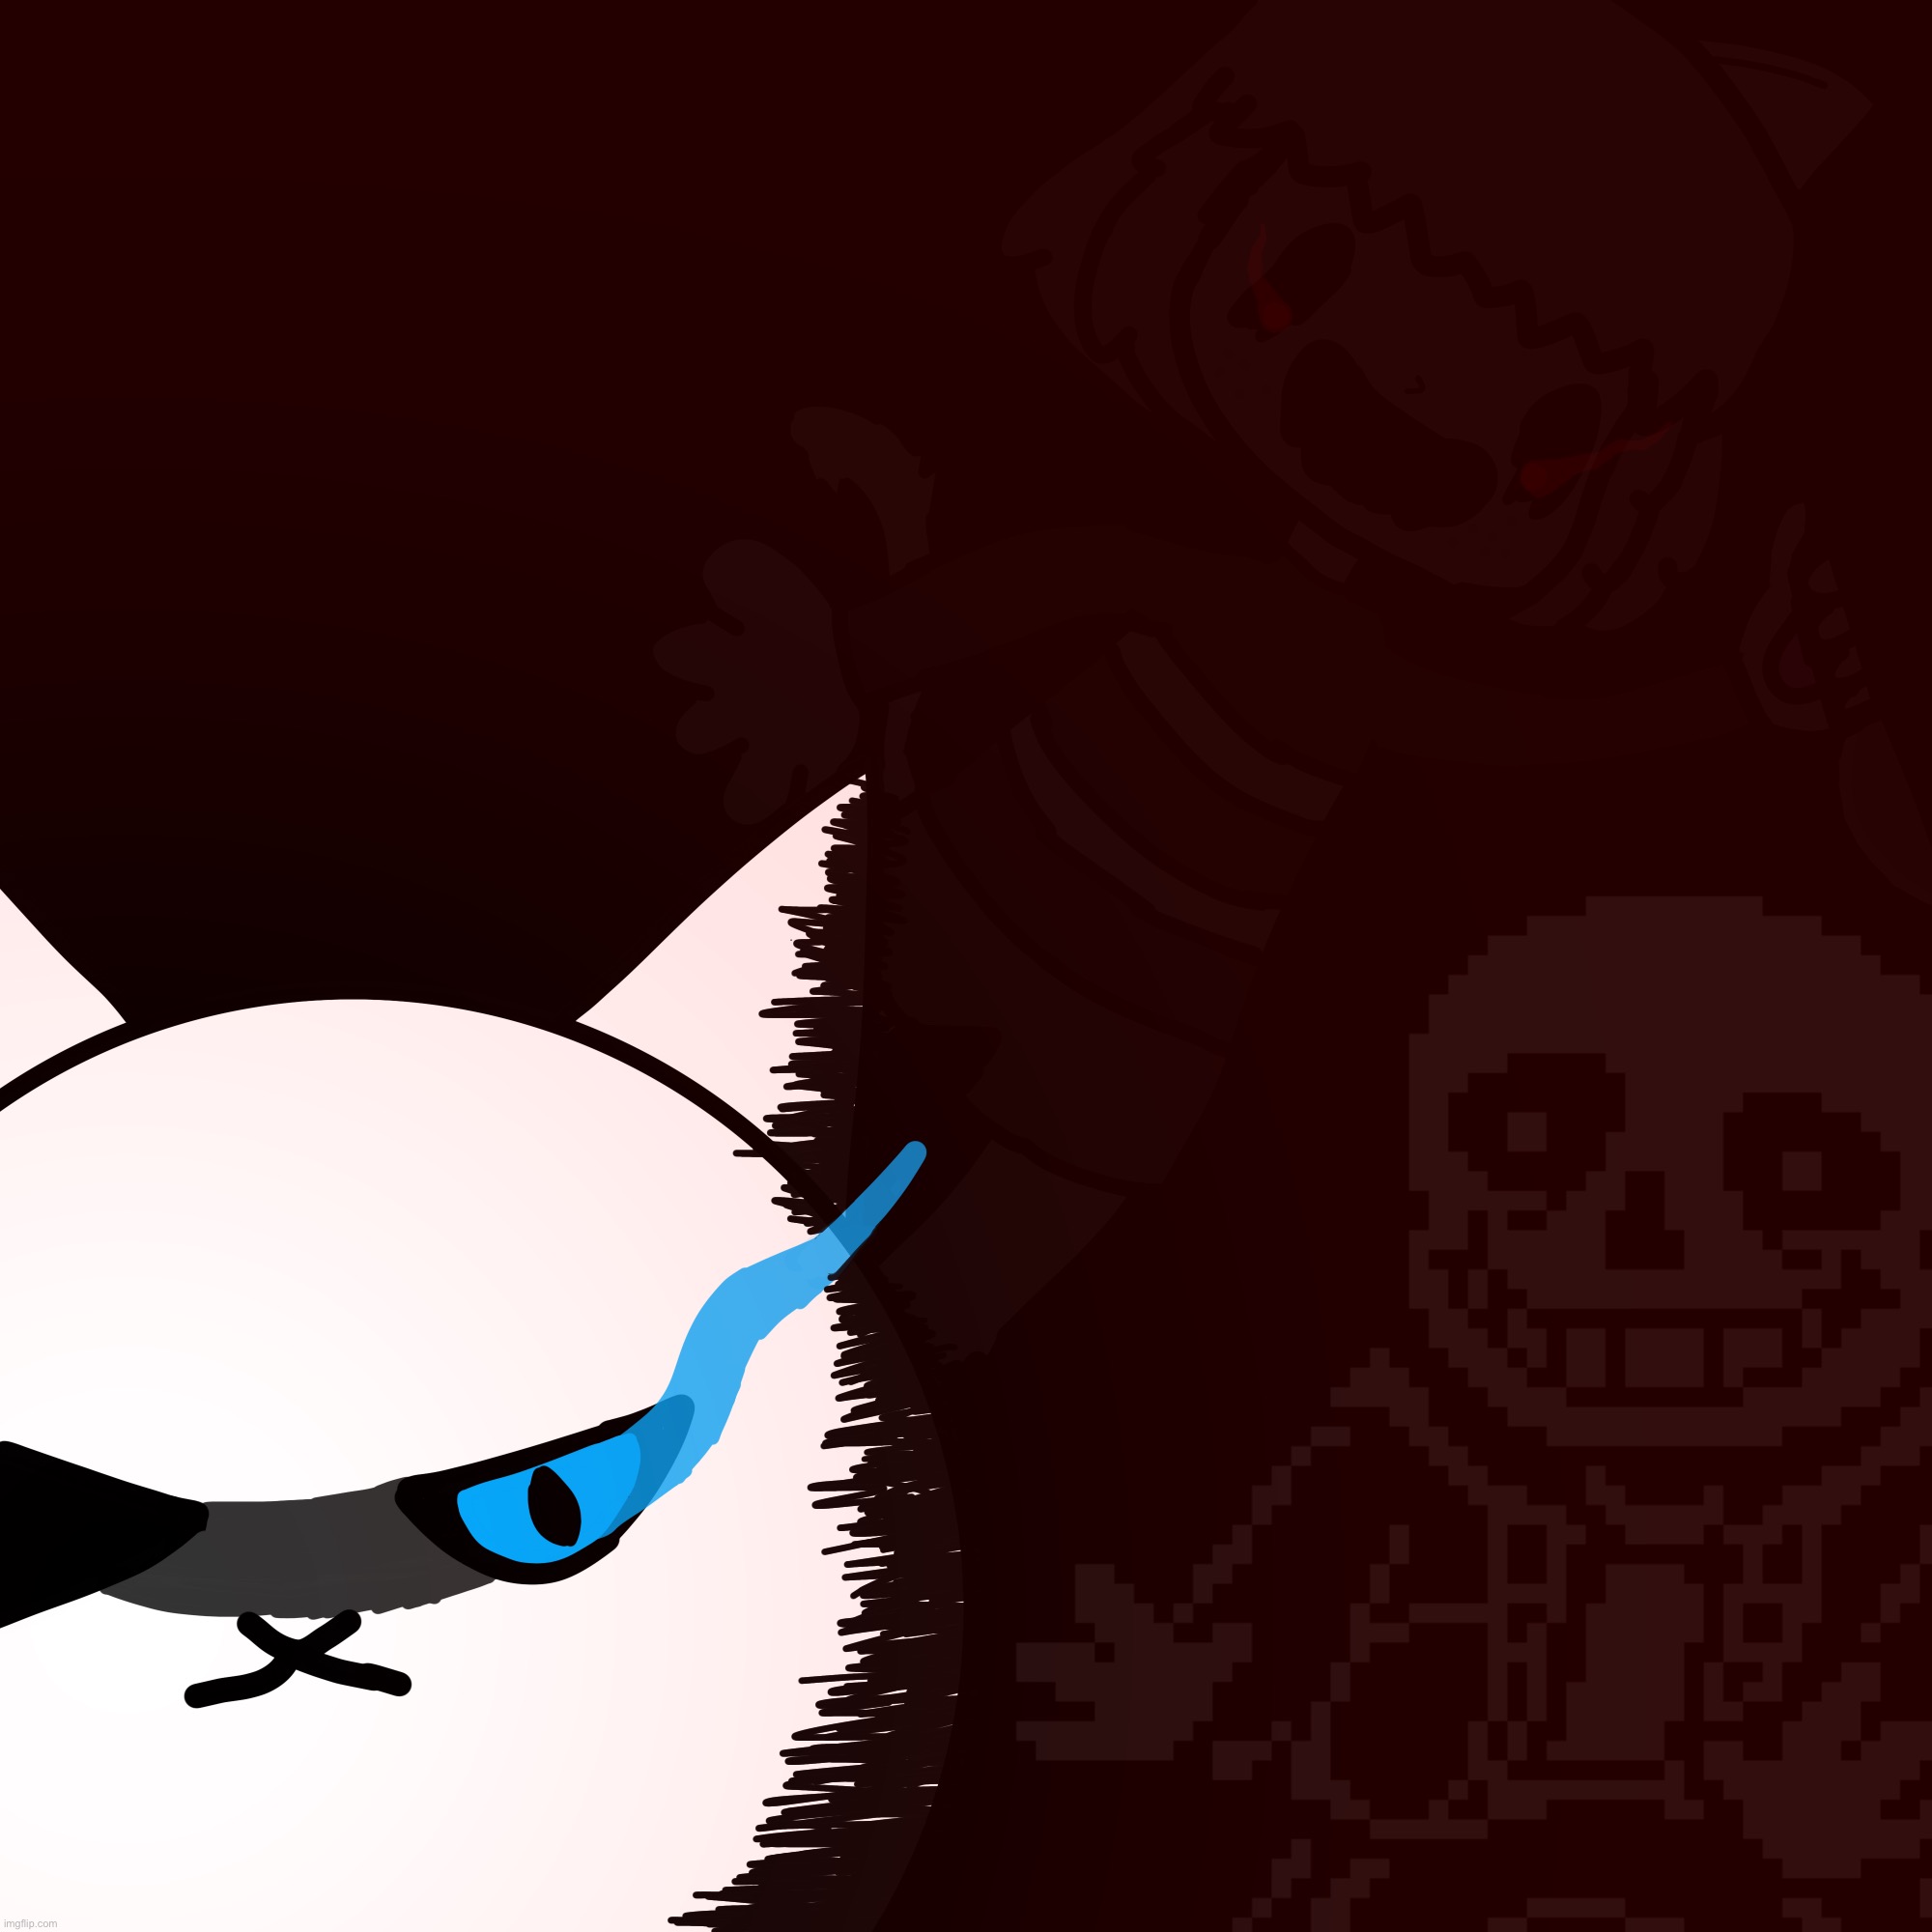 The Cat, The Devil/Killer, and The- Whoa hey pal lets back it up a bit | image tagged in memes,funny,sans,undertale,drawings,cats | made w/ Imgflip meme maker